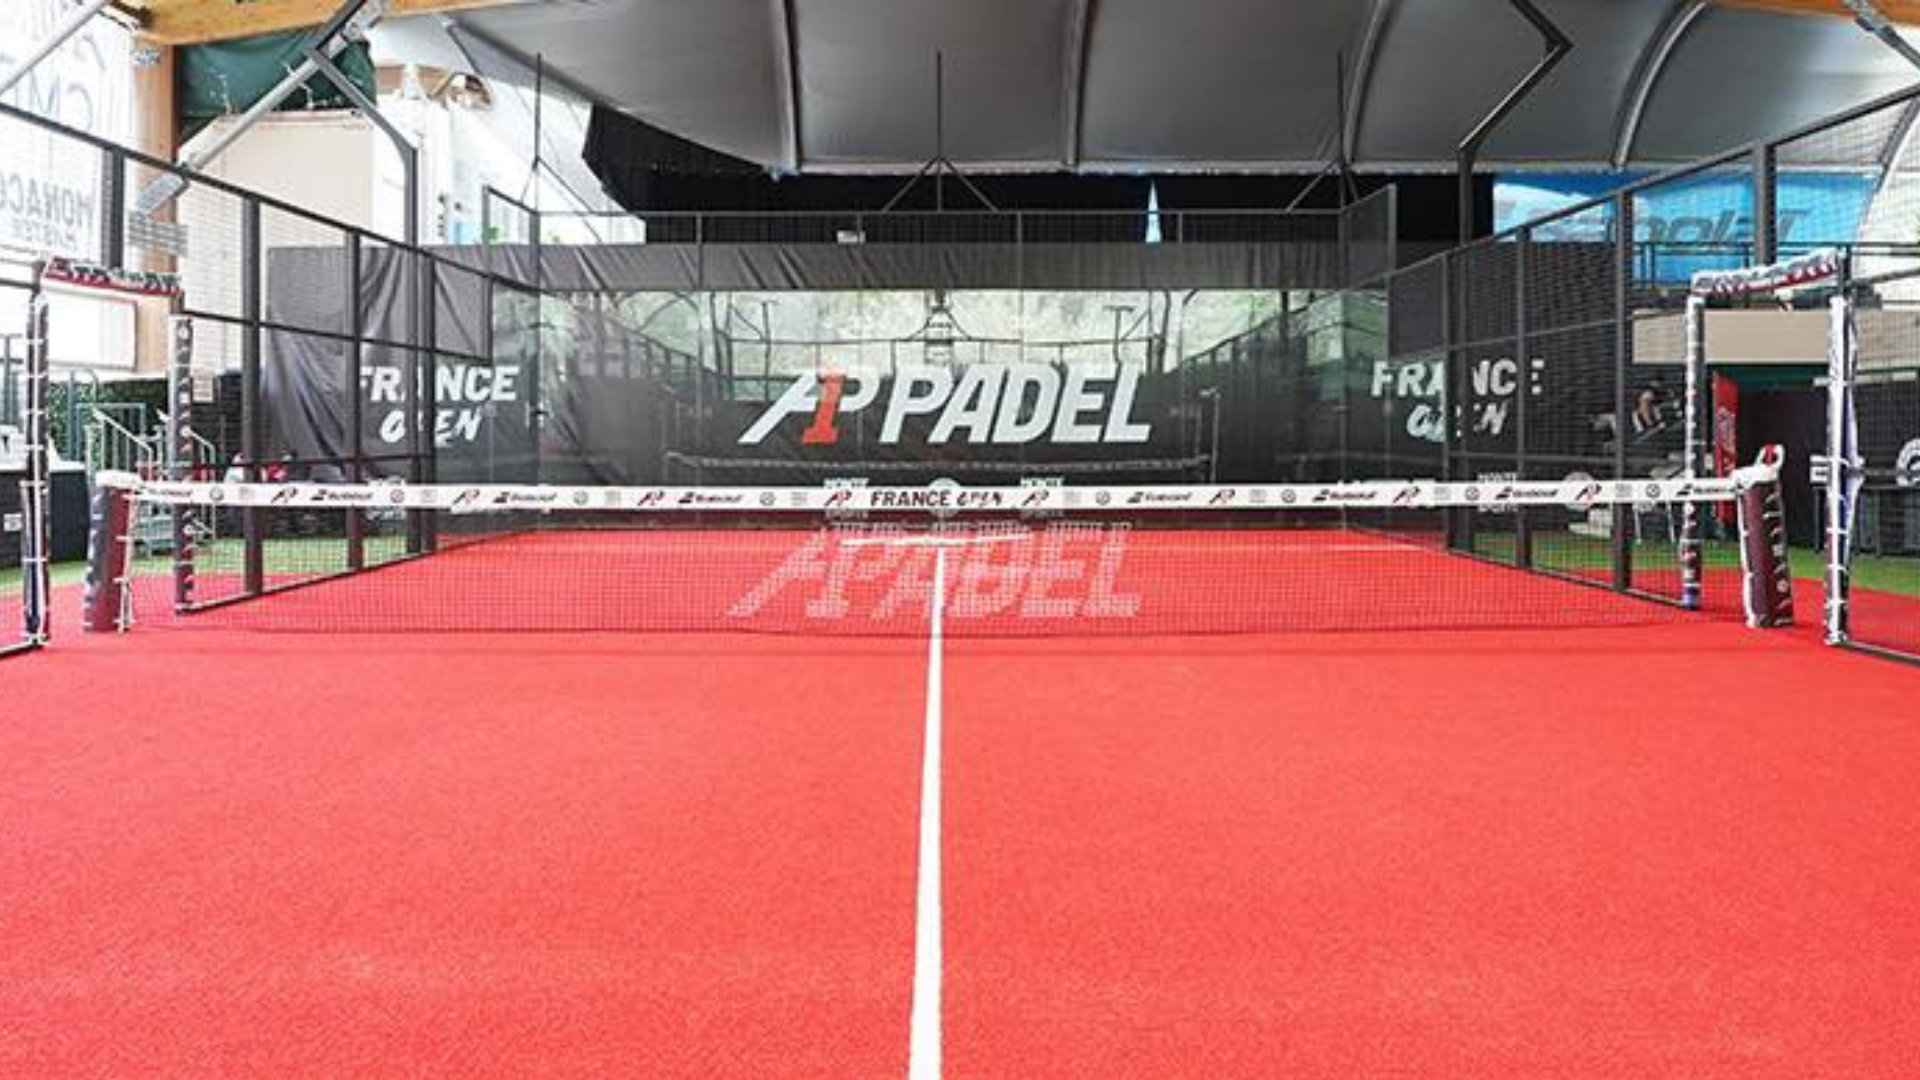 A1 Padel Tor centralny Grand Master 2023 France Beausoleil